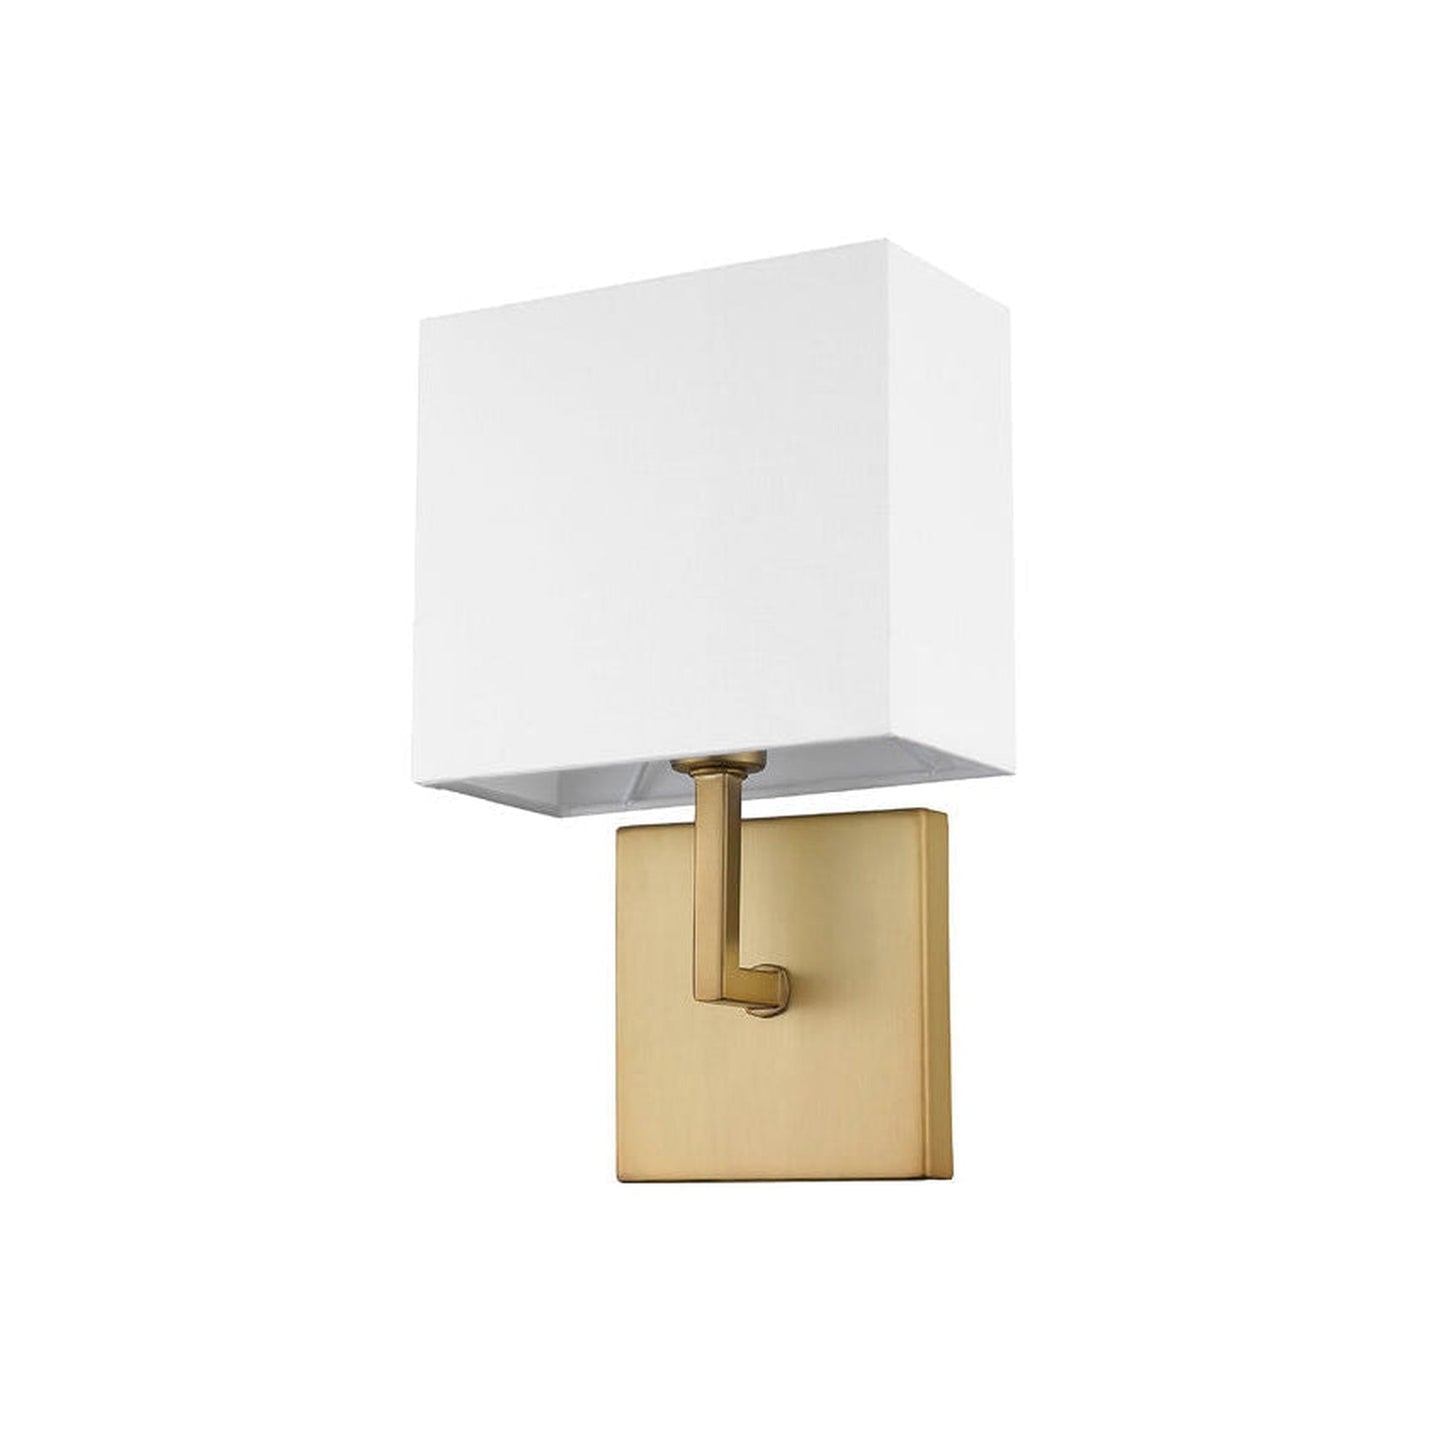 Z-Lite Saxon 7" 1-Light Olde Brass Wall Sconce With White Fabric Shade